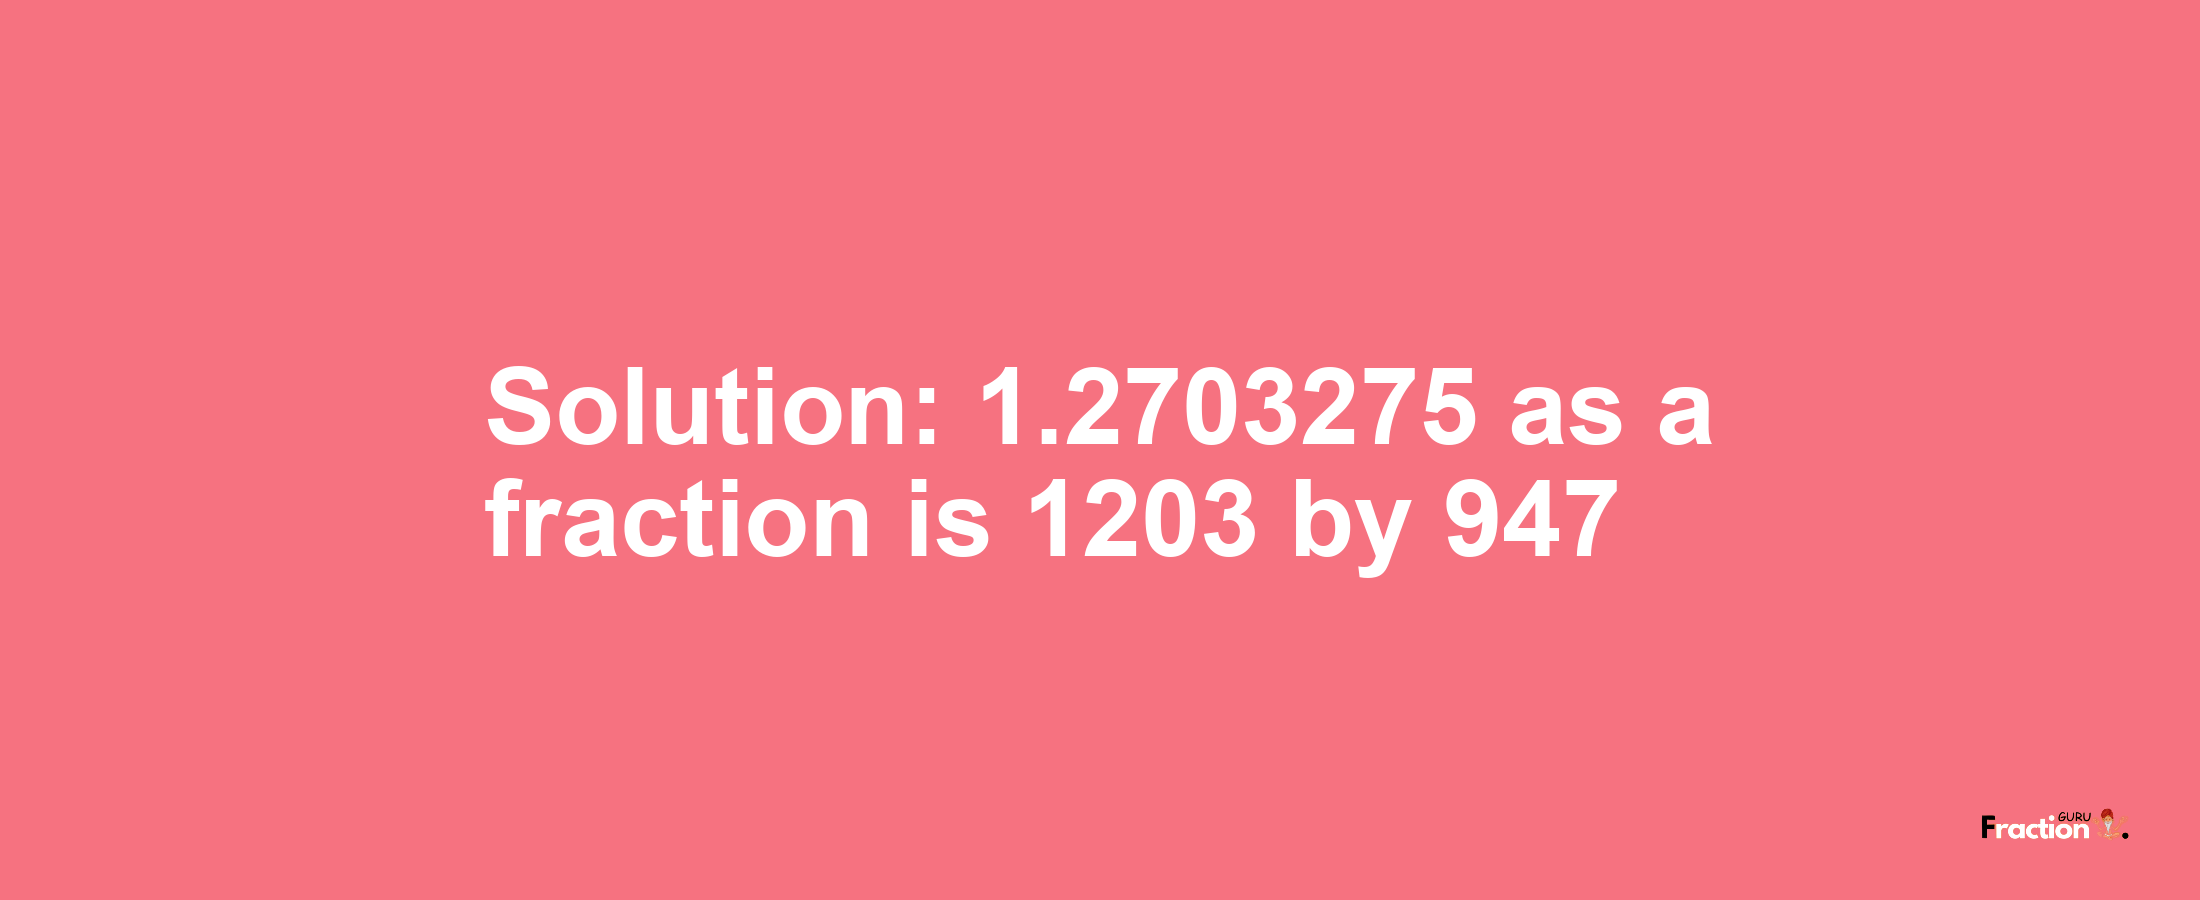 Solution:1.2703275 as a fraction is 1203/947